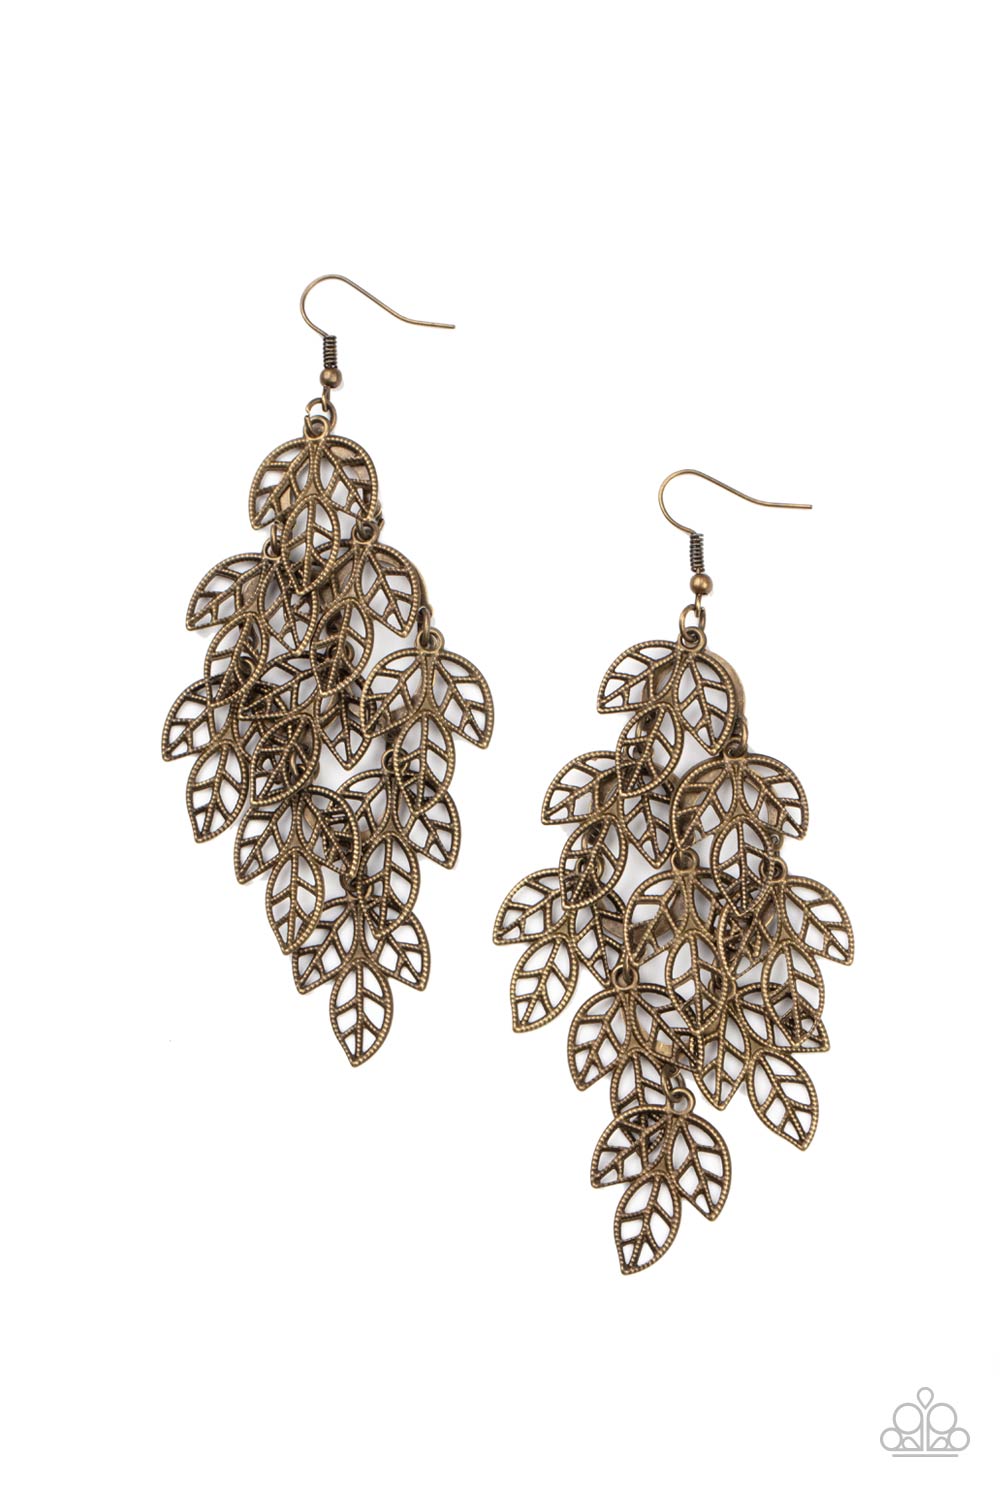 &lt;P&gt;Brushed in a rustic finish, trios of brass leaves cascade from a metallic netted backdrop, creating a seasonal tassel. Earring attaches to a standard fishhook fitting. &lt;/P&gt;  

&lt;P&gt; &lt;I&gt;  Sold as one pair of earrings. &lt;/I&gt;  &lt;/P&gt;


&lt;img src=\&quot;https://d9b54x484lq62.cloudfront.net/paparazzi/shopping/images/517_tag150x115_1.png\&quot; alt=\&quot;New Kit\&quot; align=\&quot;middle\&quot; height=\&quot;50\&quot; width=\&quot;50\&quot;/&gt;